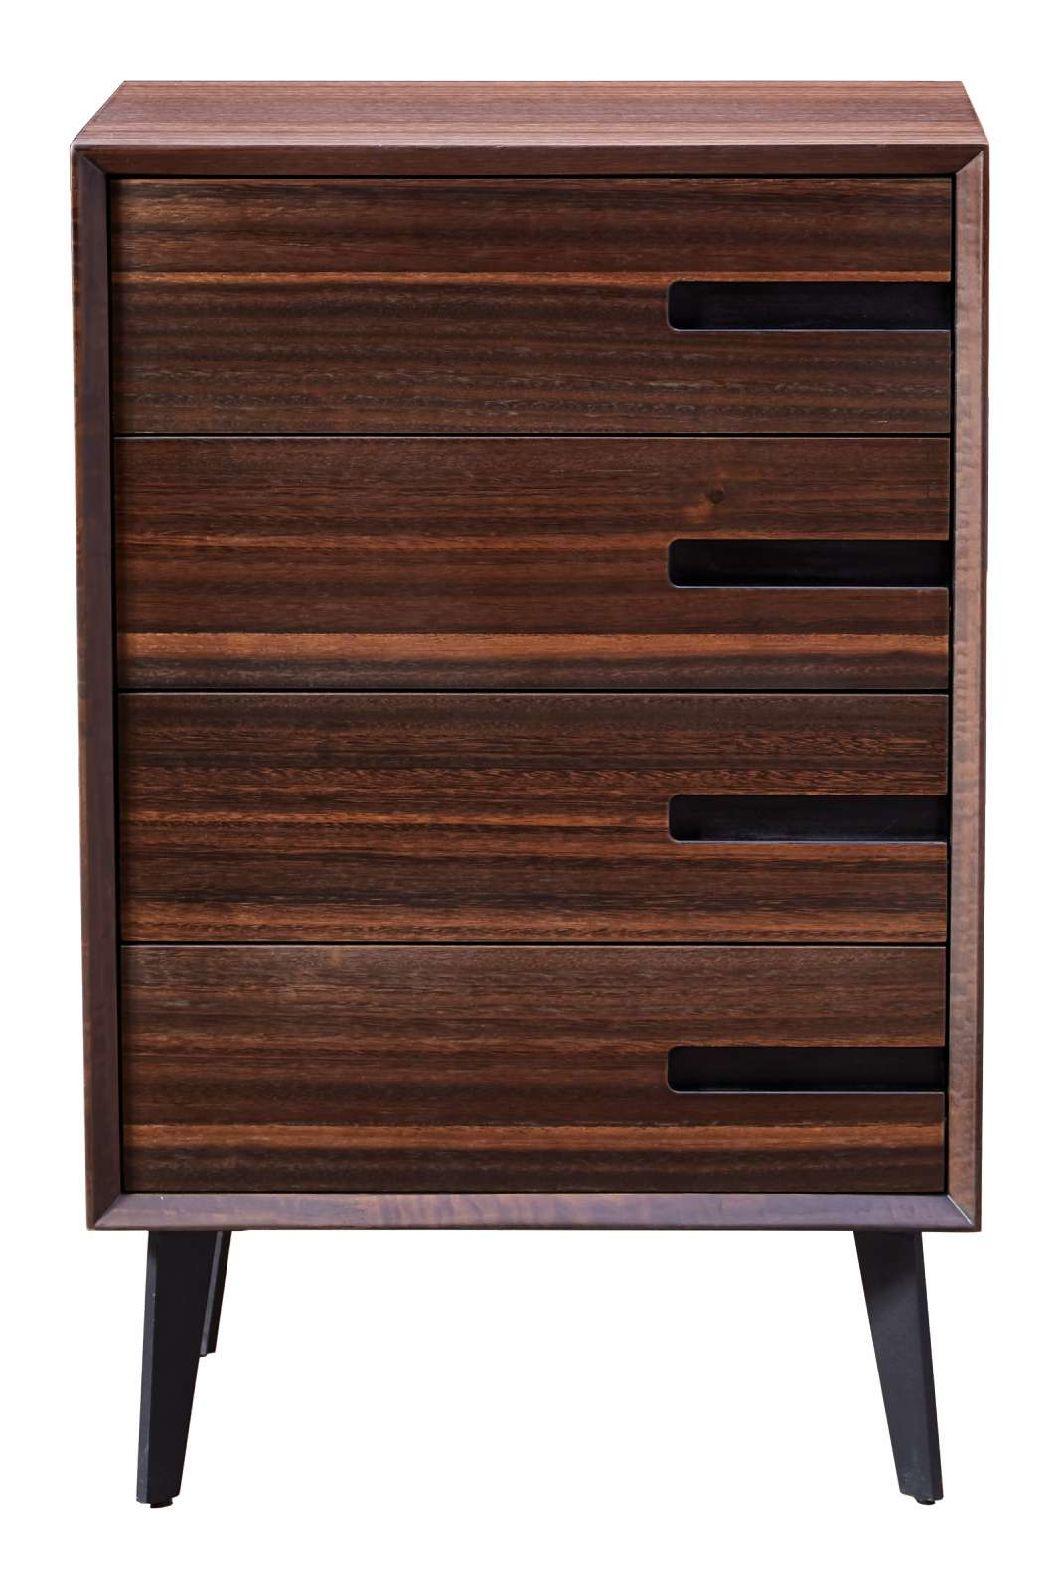 Fu12-4 Wooden Night Cabinet, Latest Design Night Stand in Home and Hotel Furniture Custom-Made